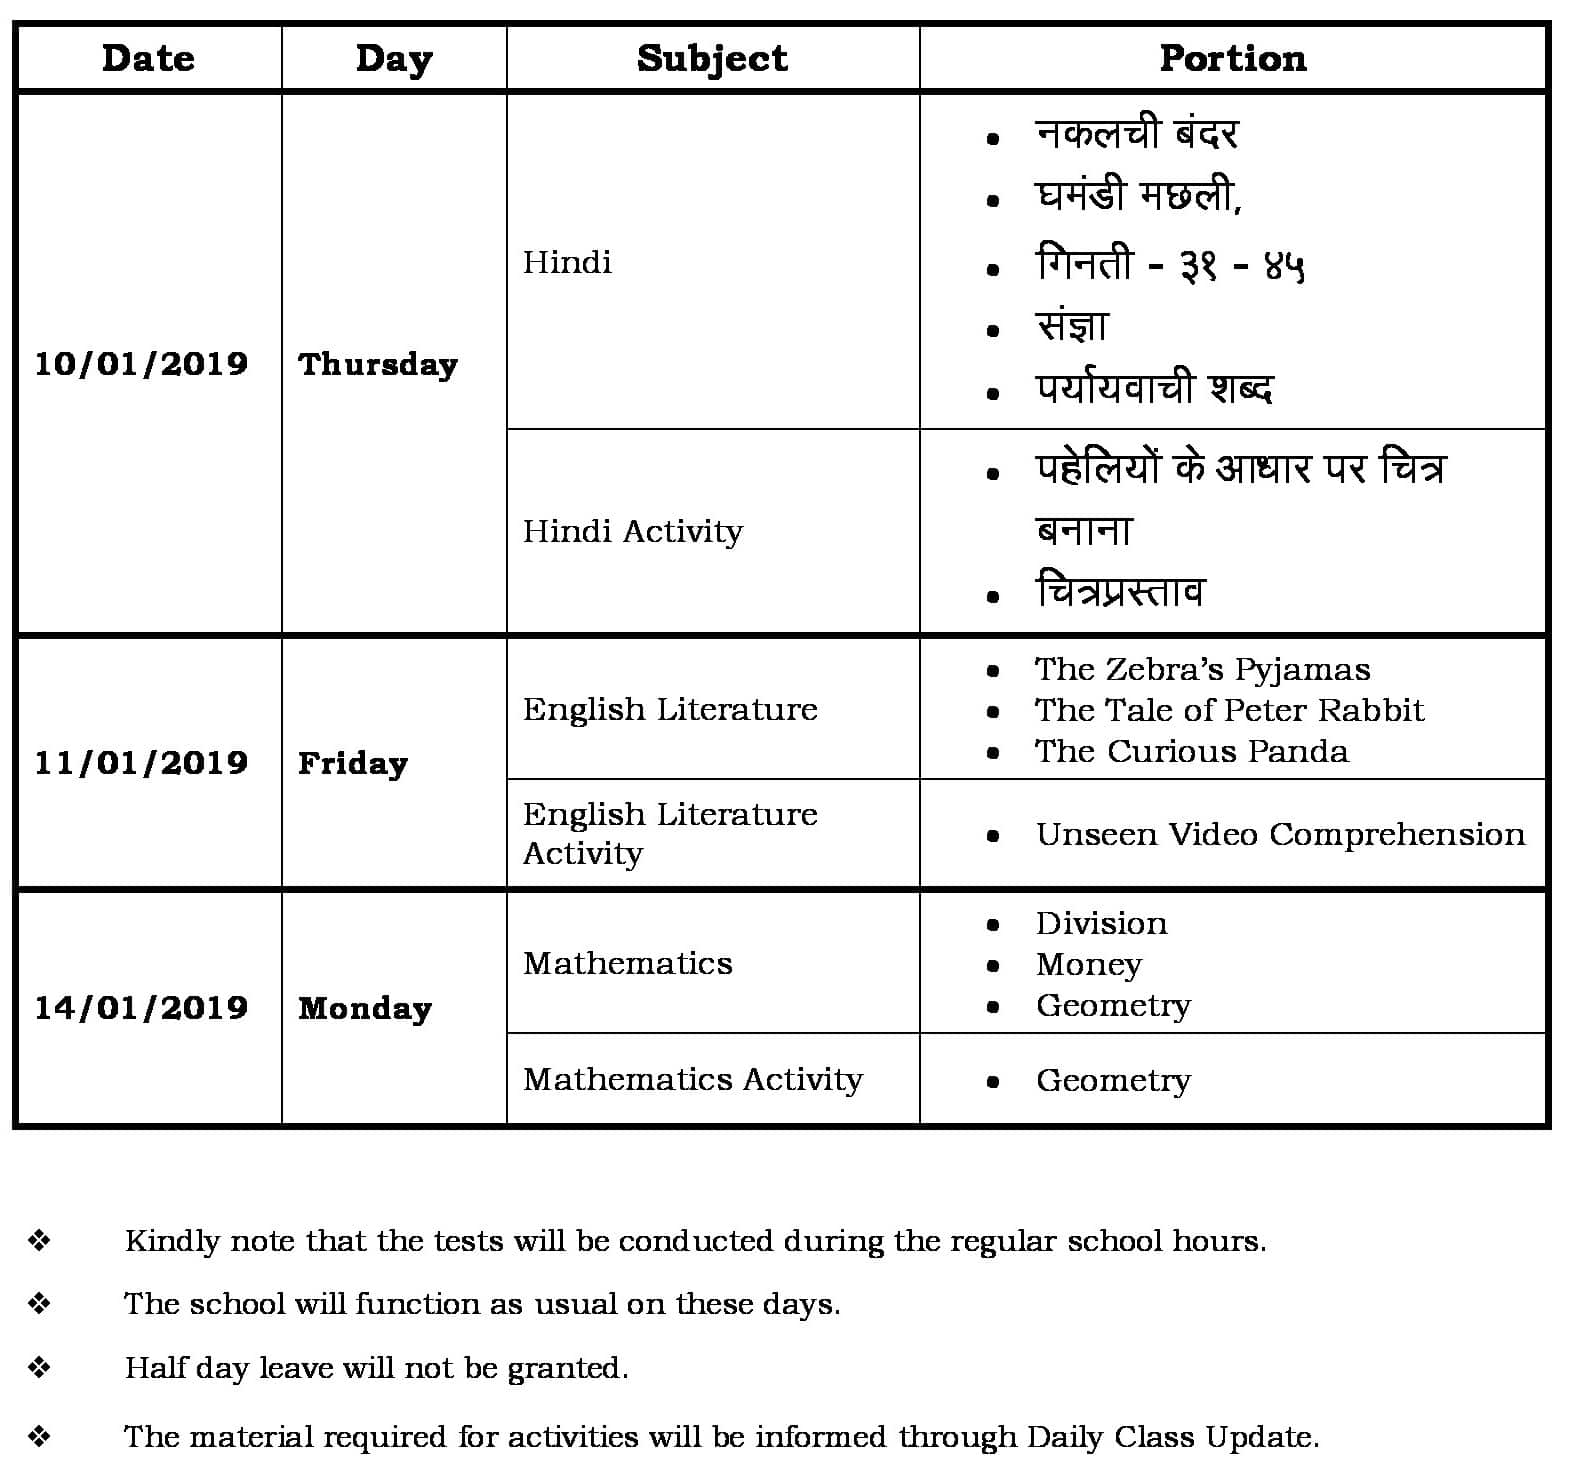 FA3 Portion and Schedule